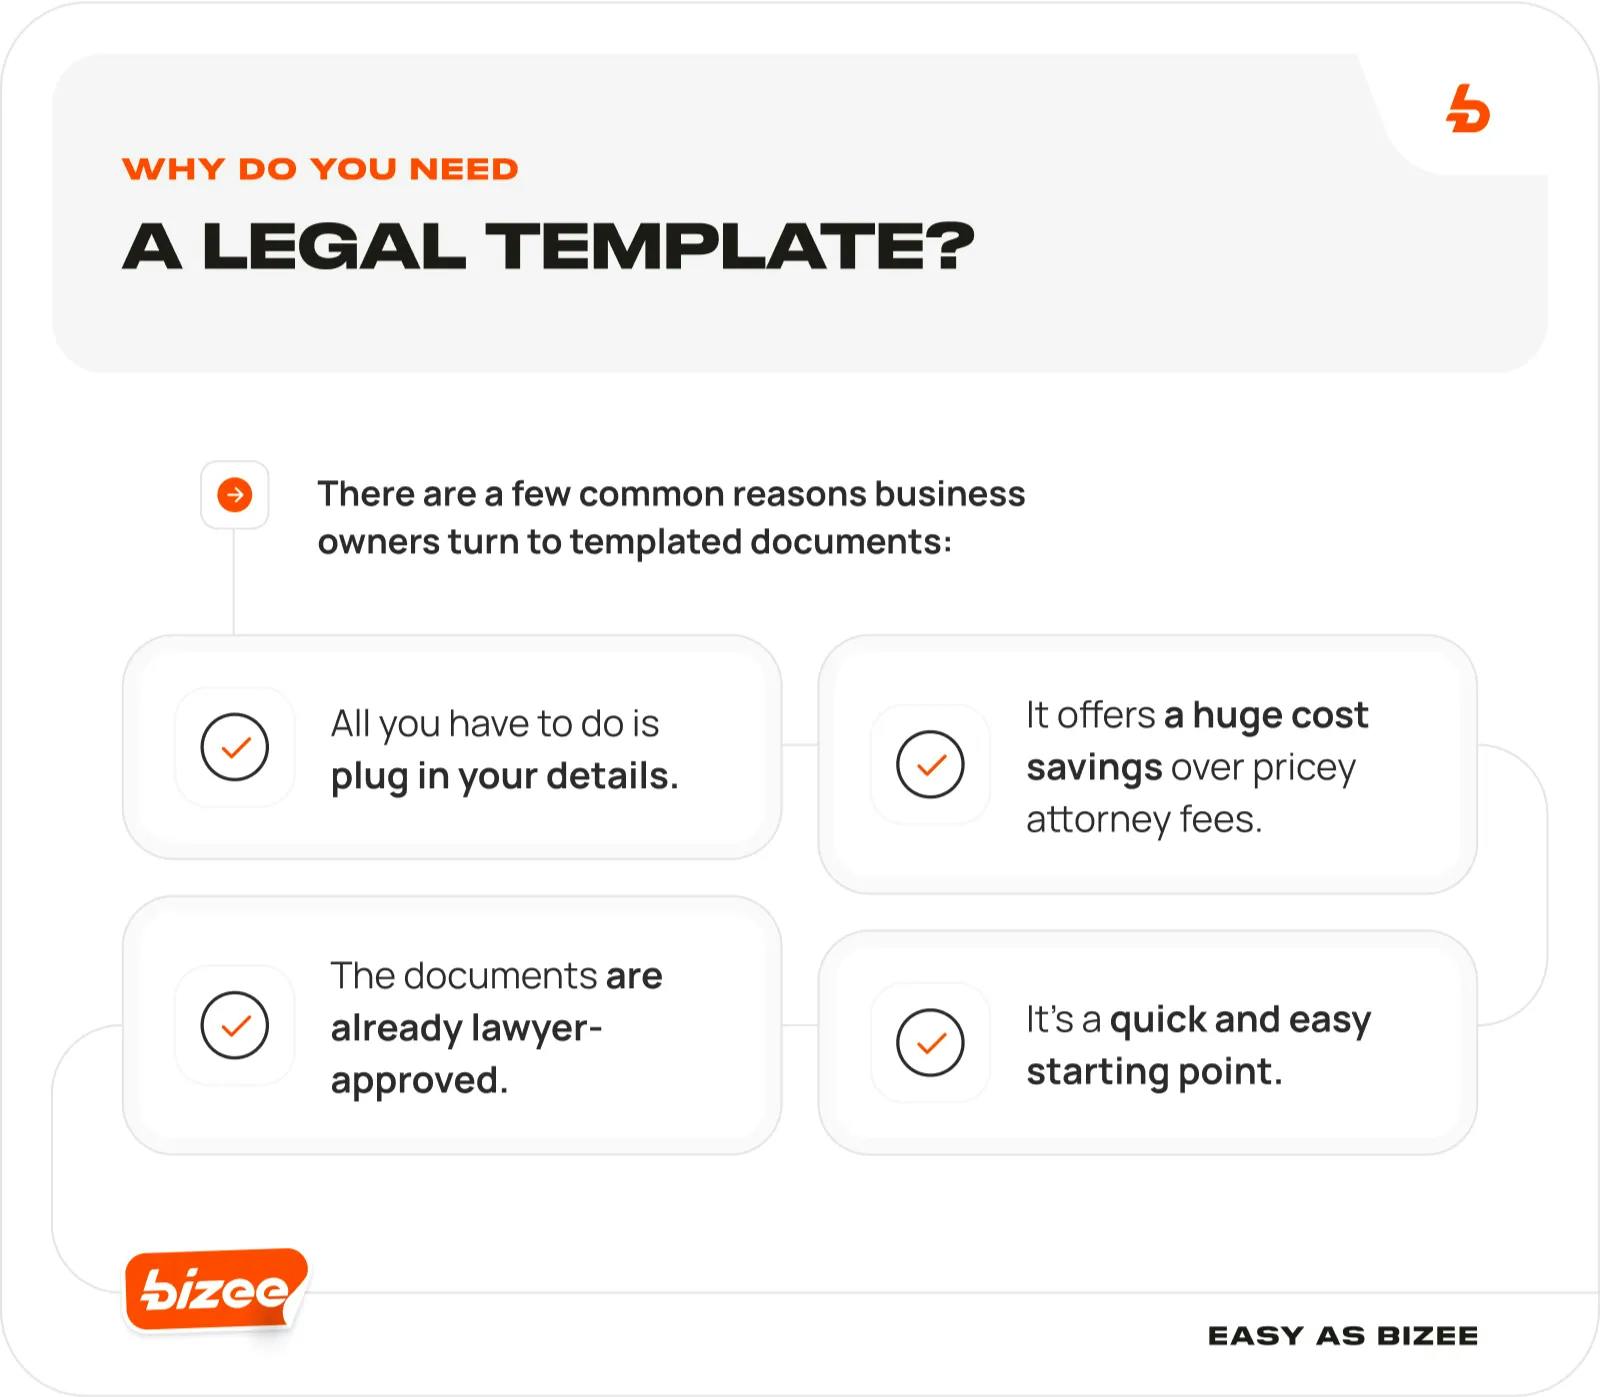 Why Do You Need a Legal Template